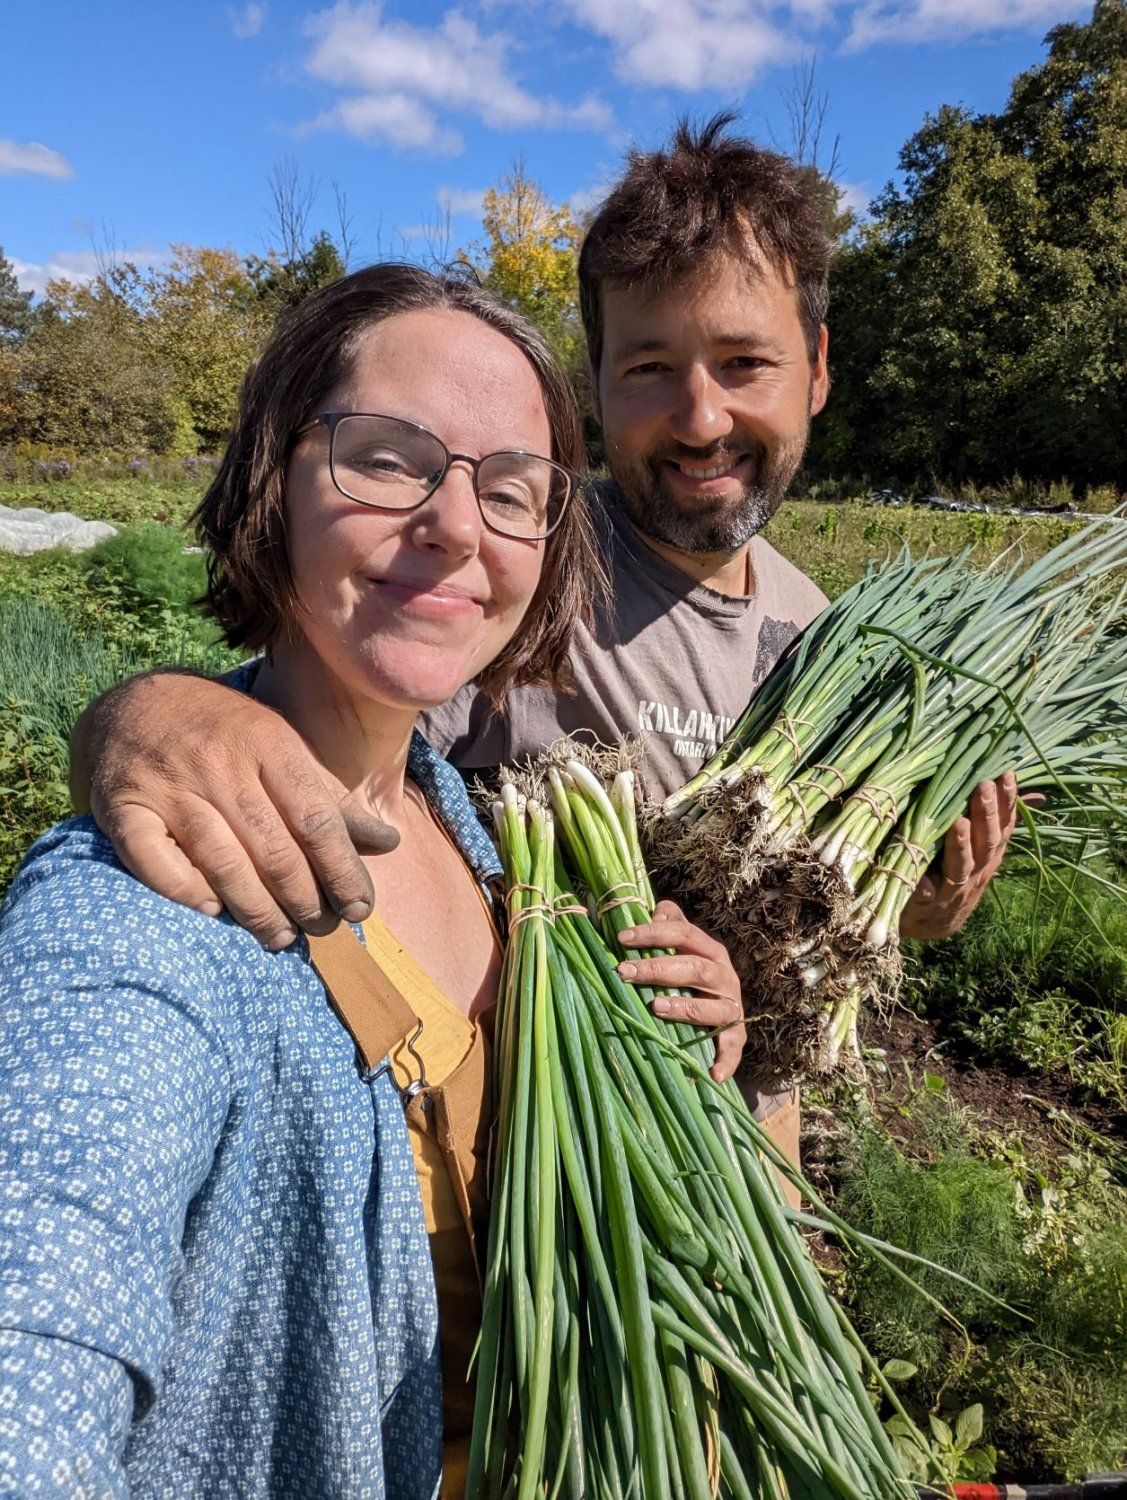 Next Happening: 2022 Farm Share Week 17 - Fall Is Here